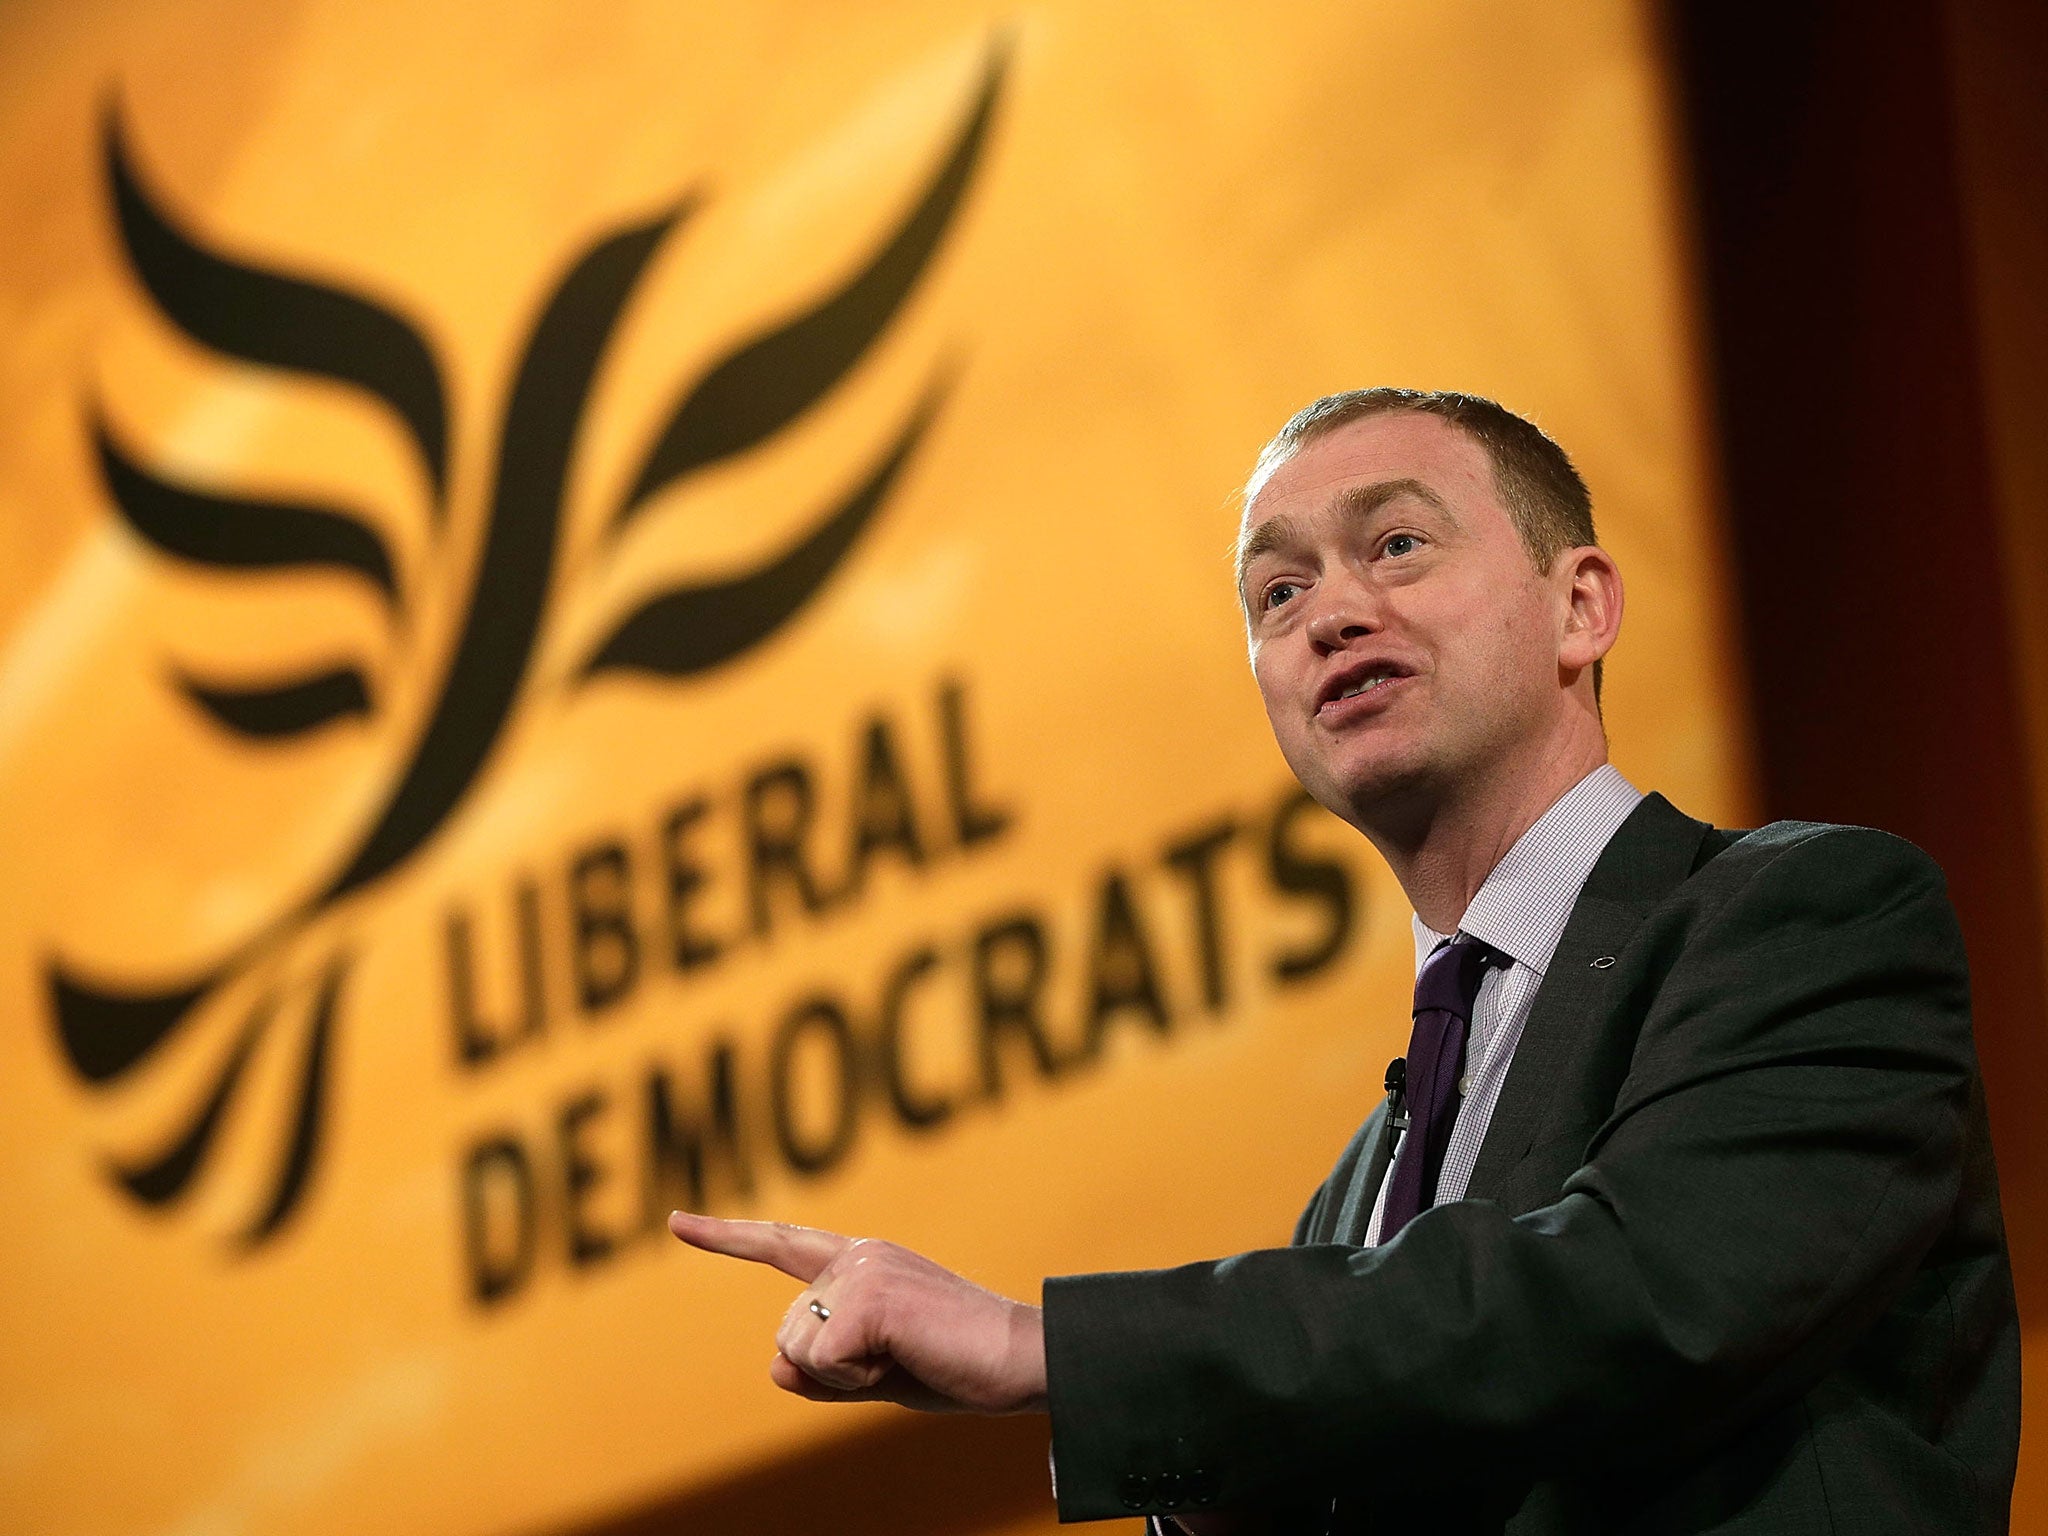 Having kept his seat in the election, Tim Farron is the frontrunner to be the new Lib Dem leader